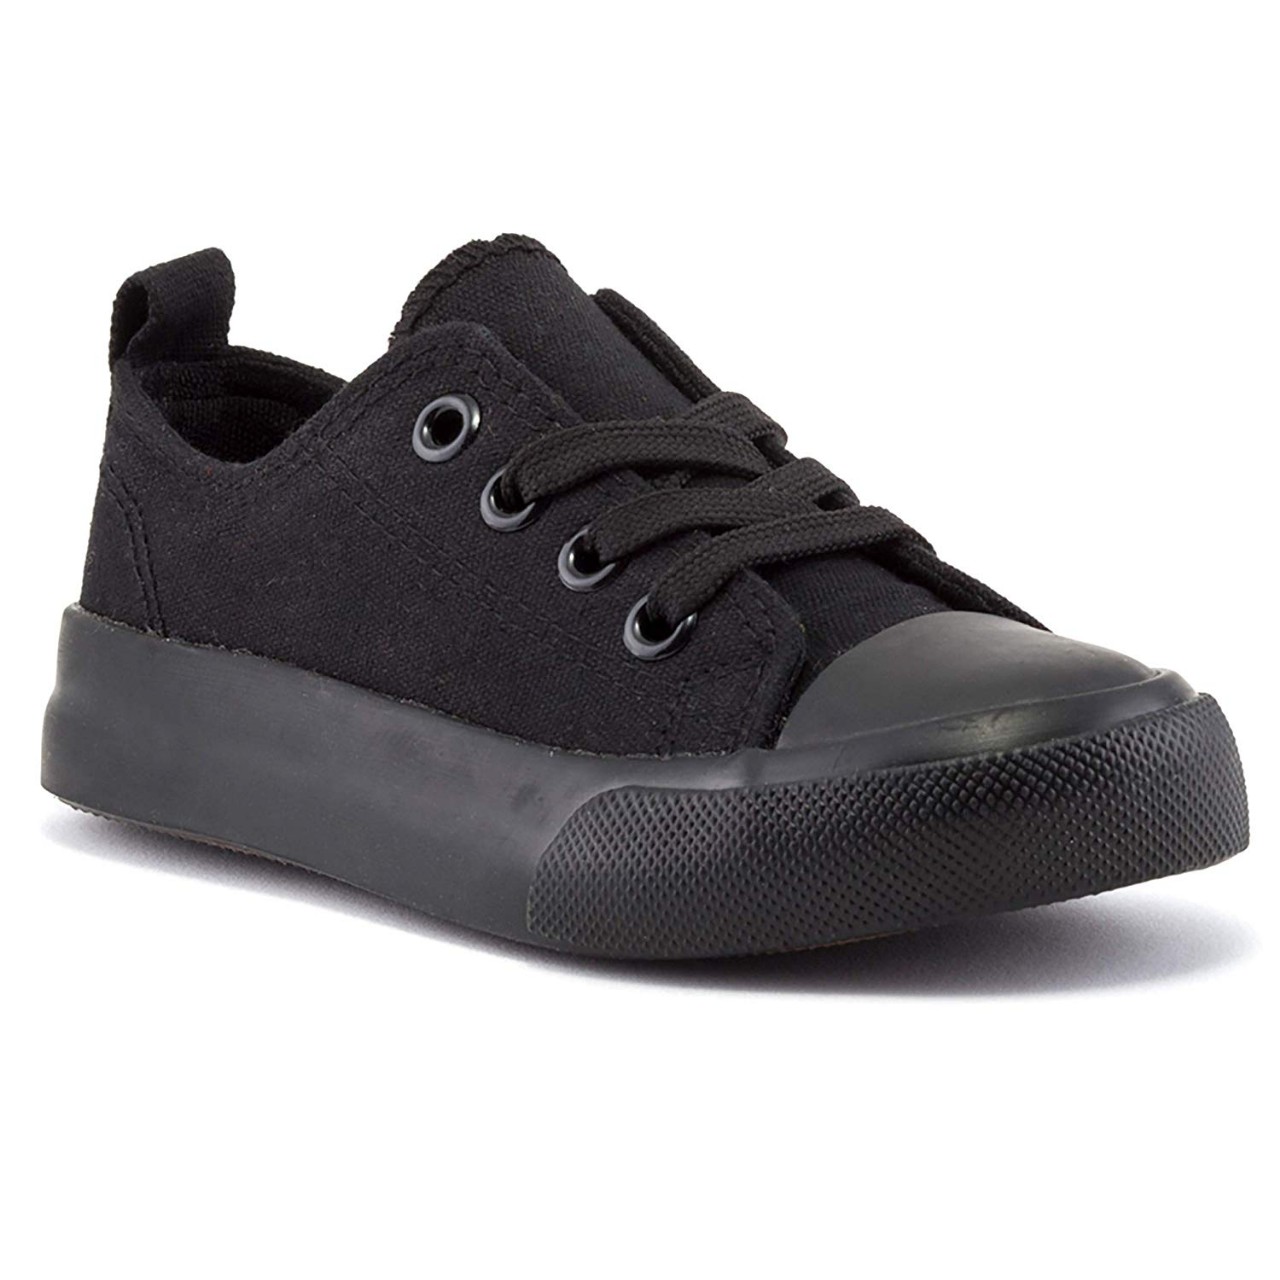 Low Top Vulc Canvas Shoes for Kids, Kids Sneakers for Girls and Boys